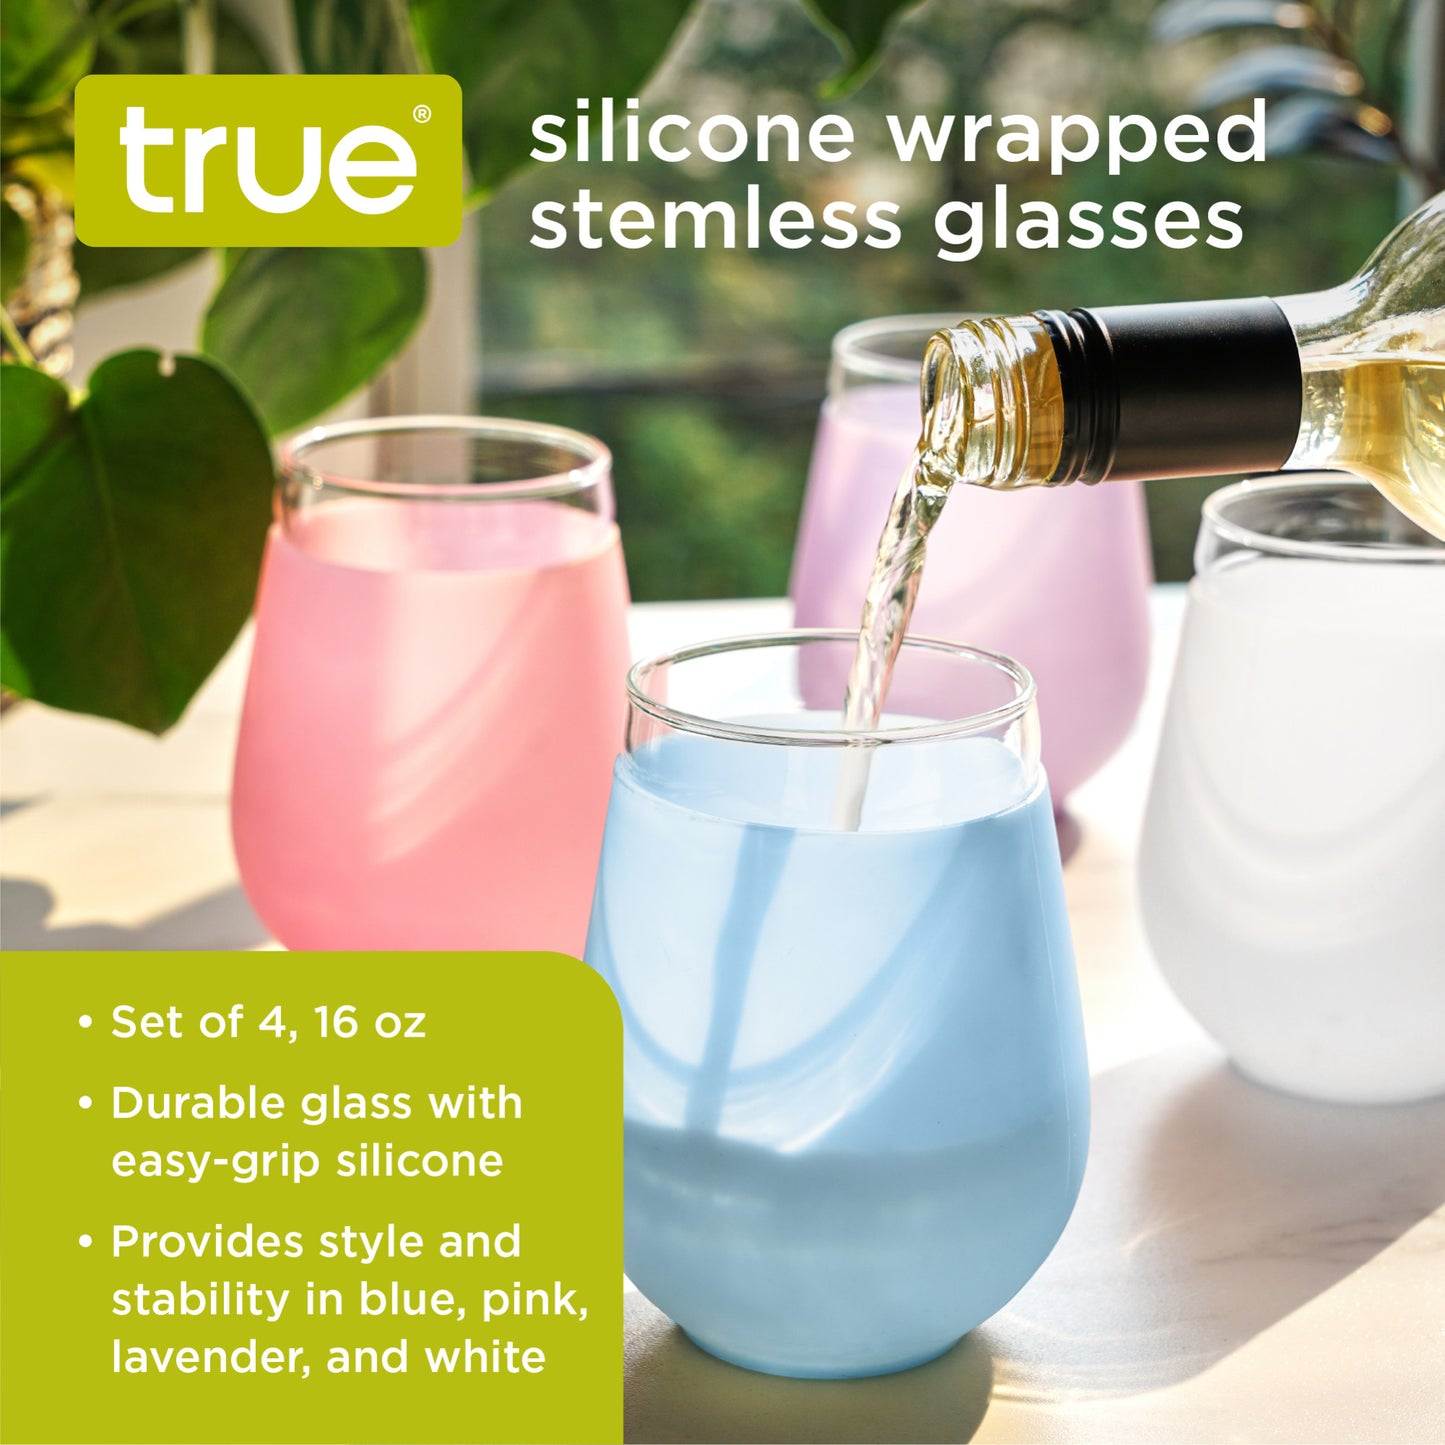 Silicone Wrapped Glasses, Set of 4 by True